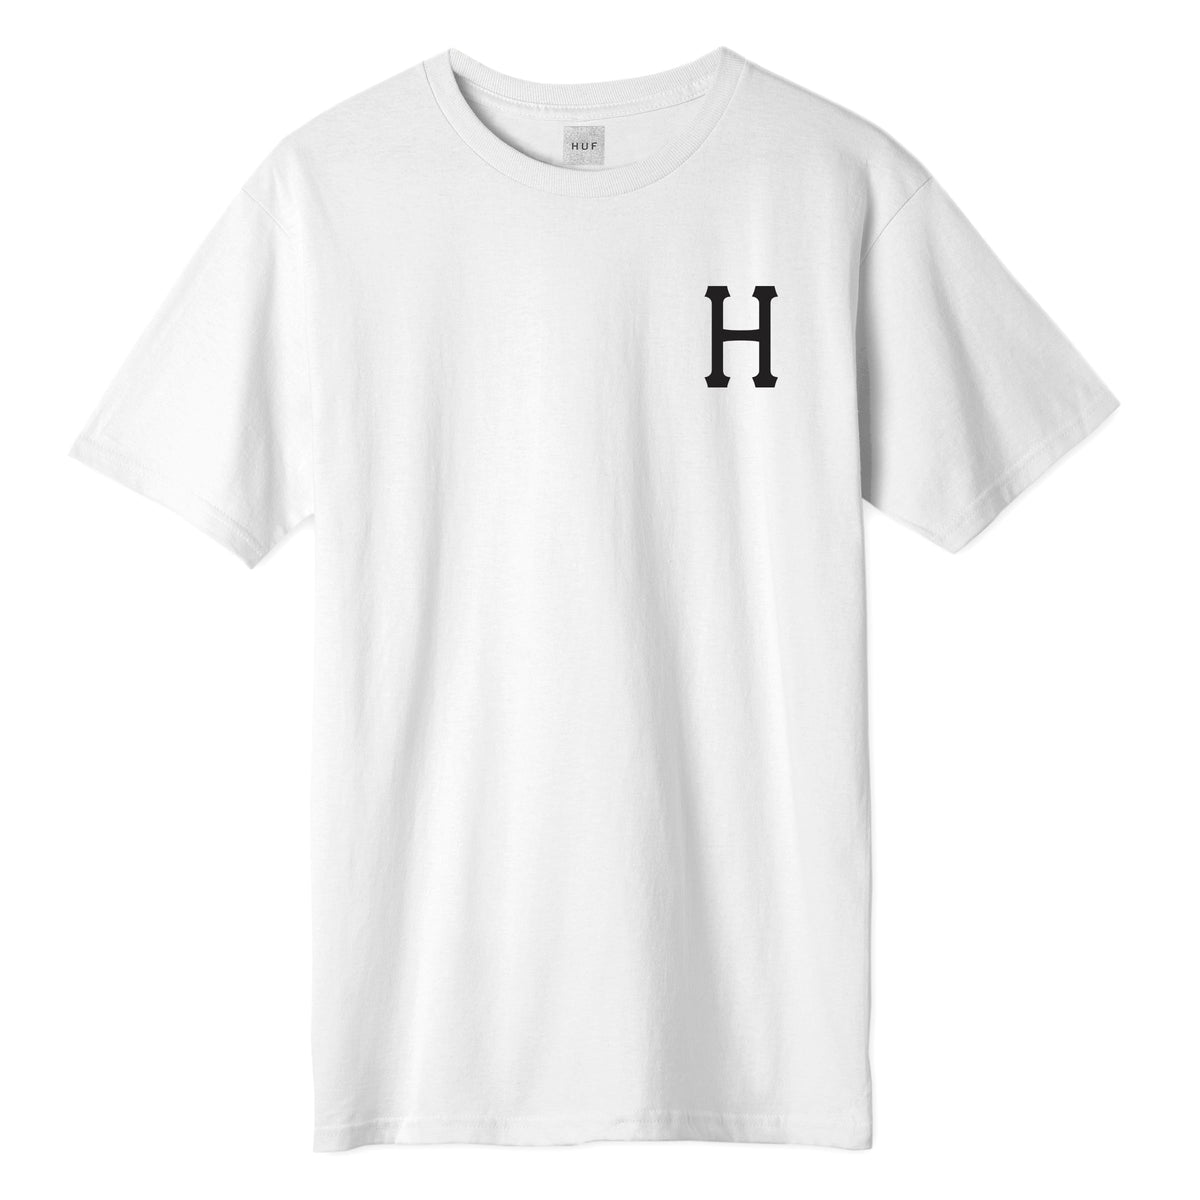 huf t shirt meaning